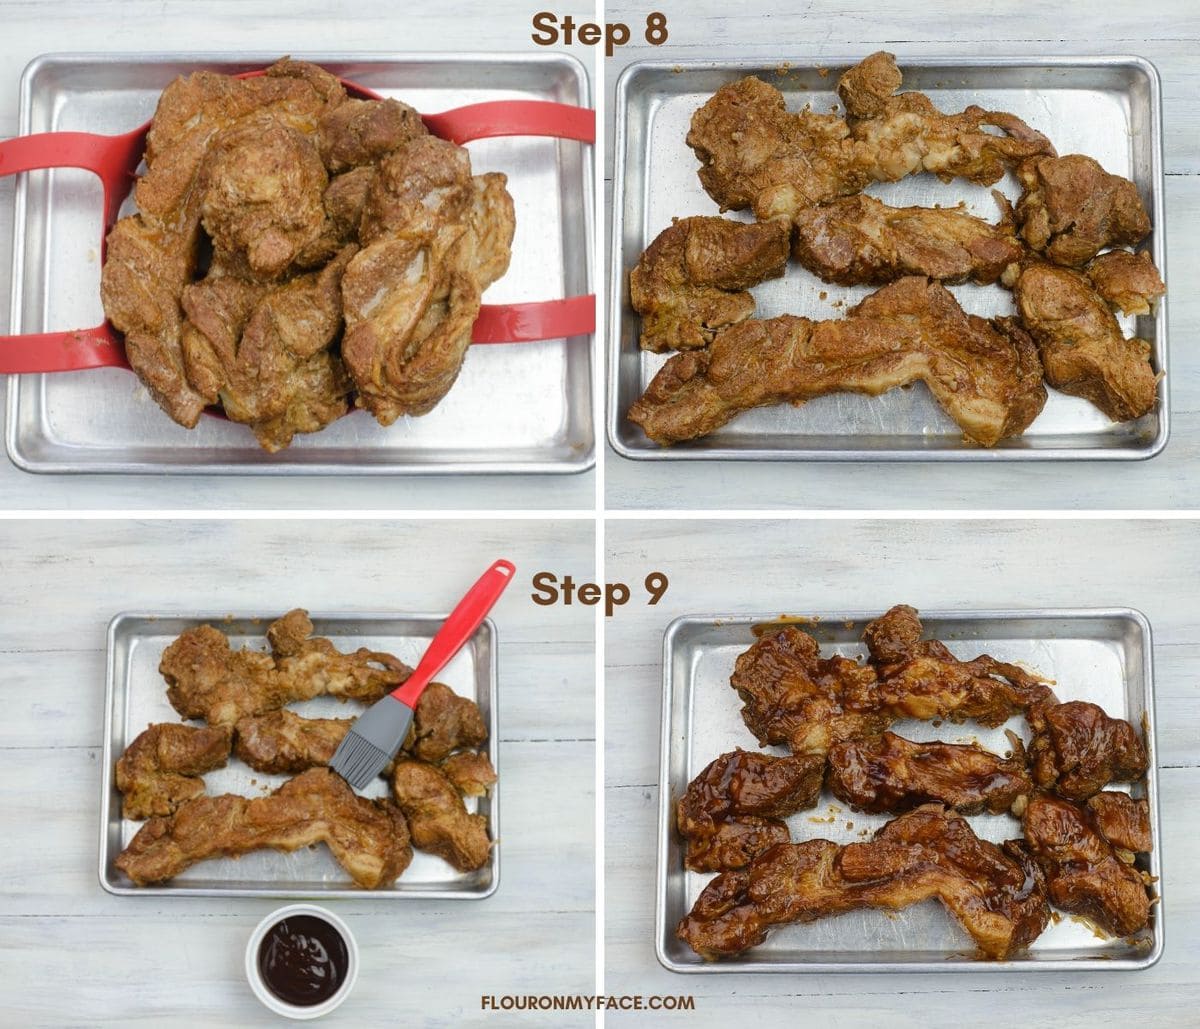 Four image collage showing the steps to glaze and brown instant pot pork ribs.